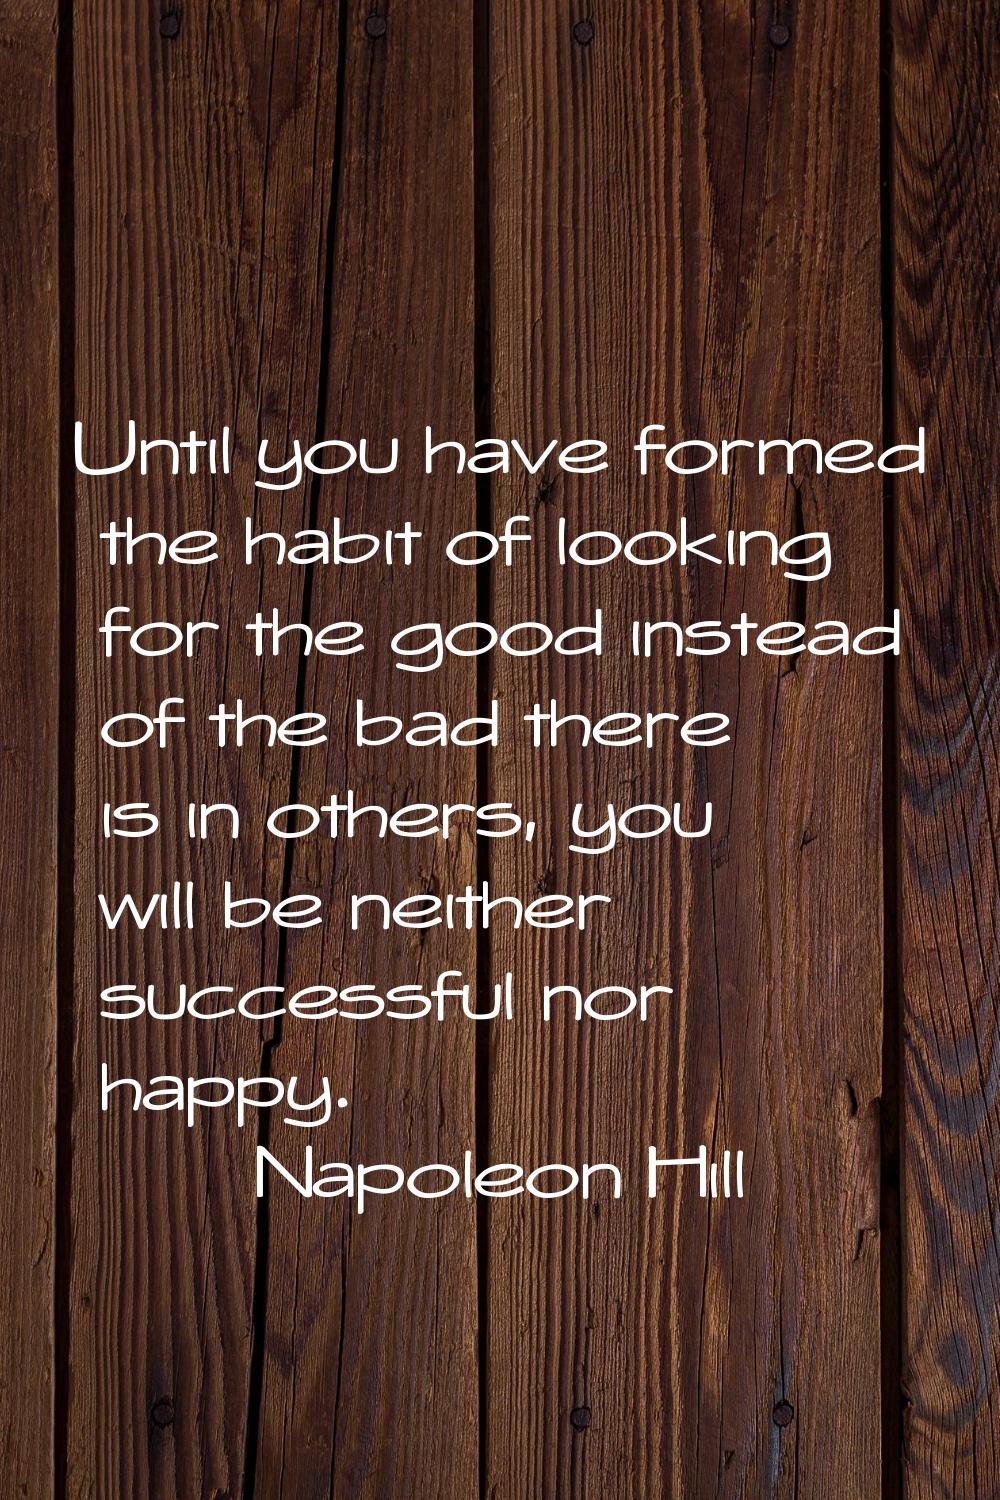 Until you have formed the habit of looking for the good instead of the bad there is in others, you 